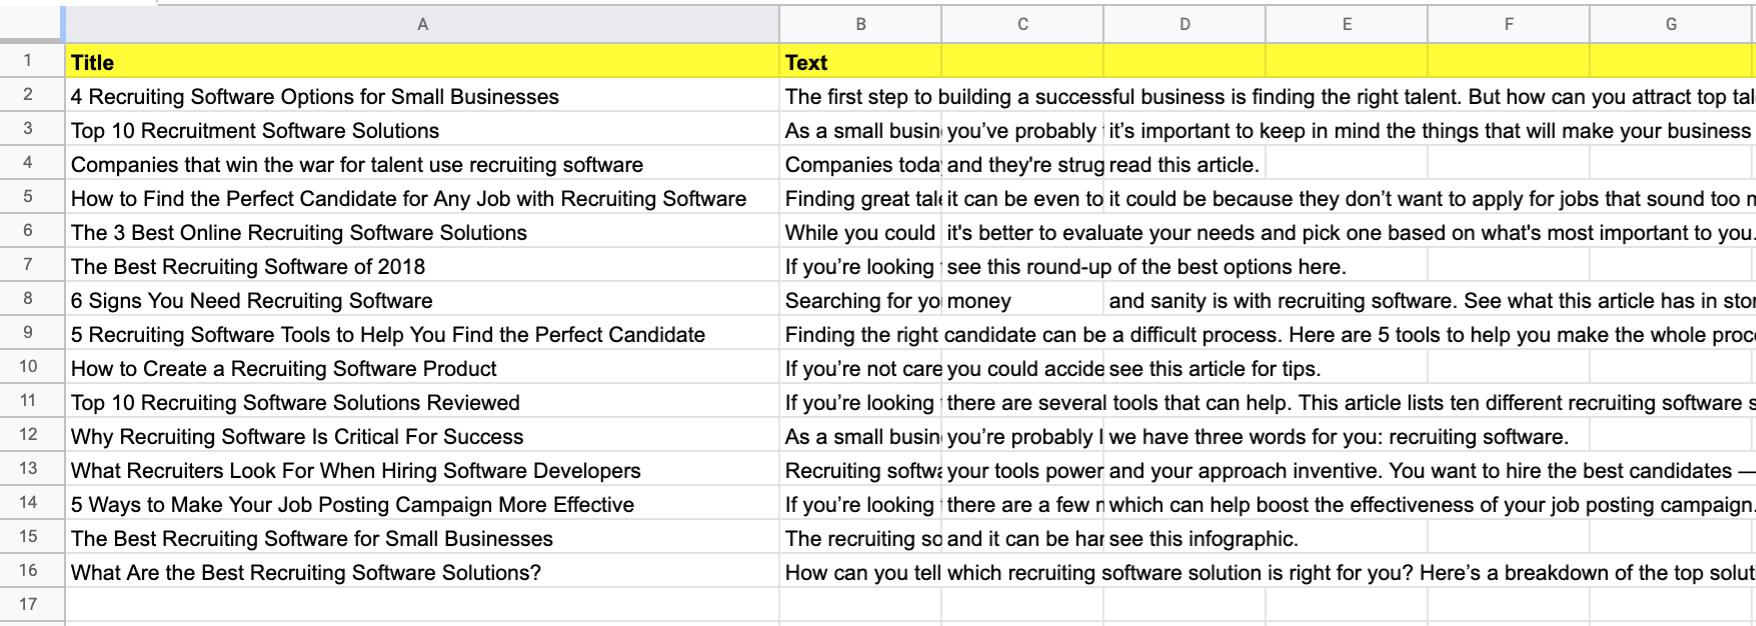 Excel spreadsheet of blog topic ideas exported from the blog ideas tool in Search Atlas